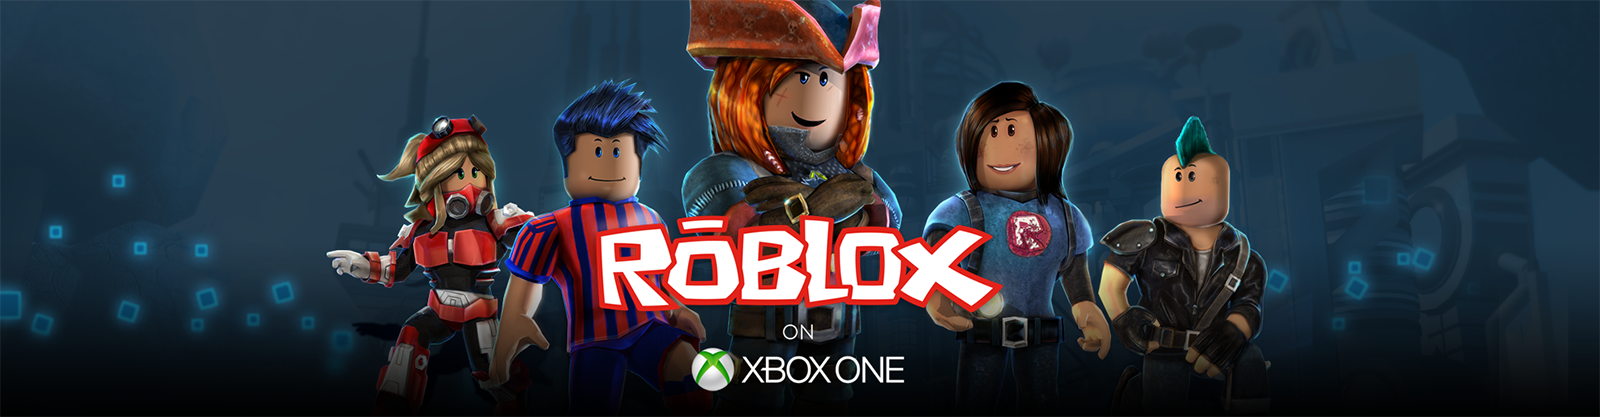 How To Login To Roblox On Pc With Xbox Account